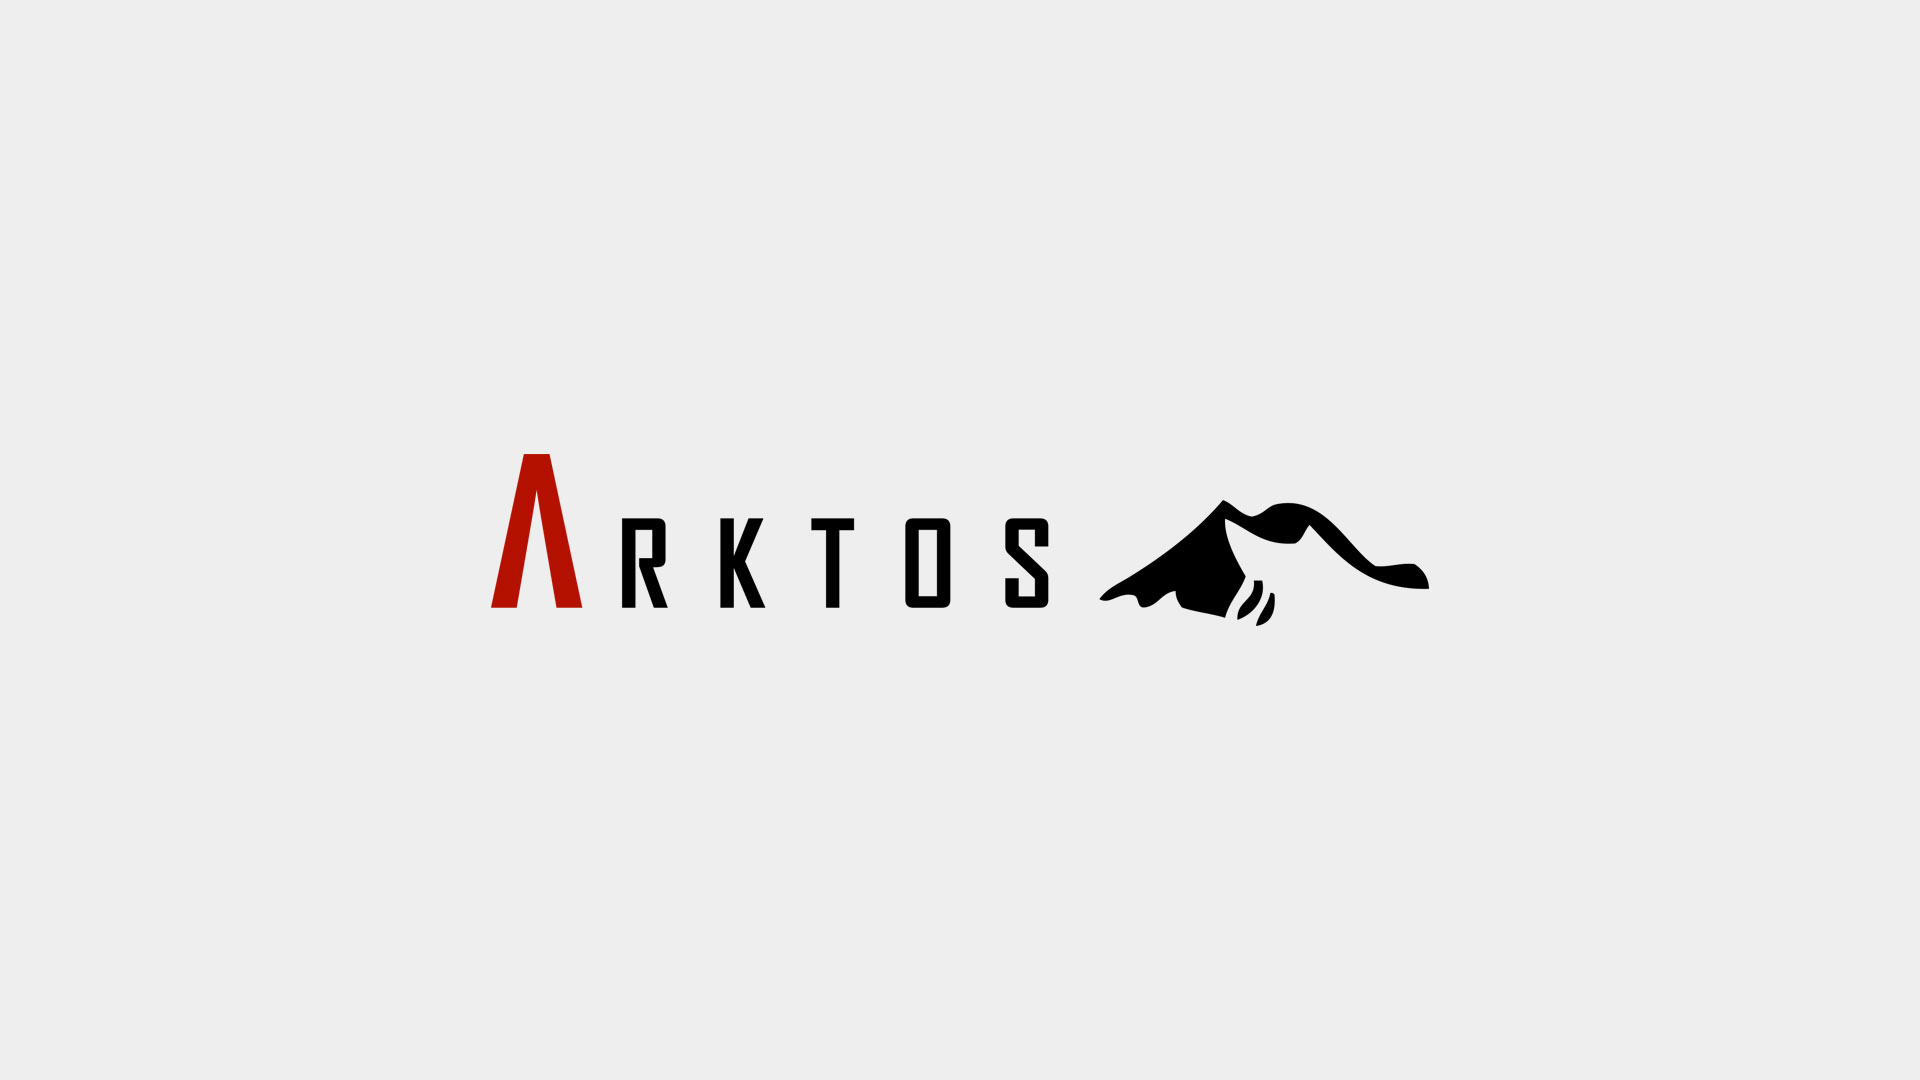 Arktos Rejects Far-Right Label